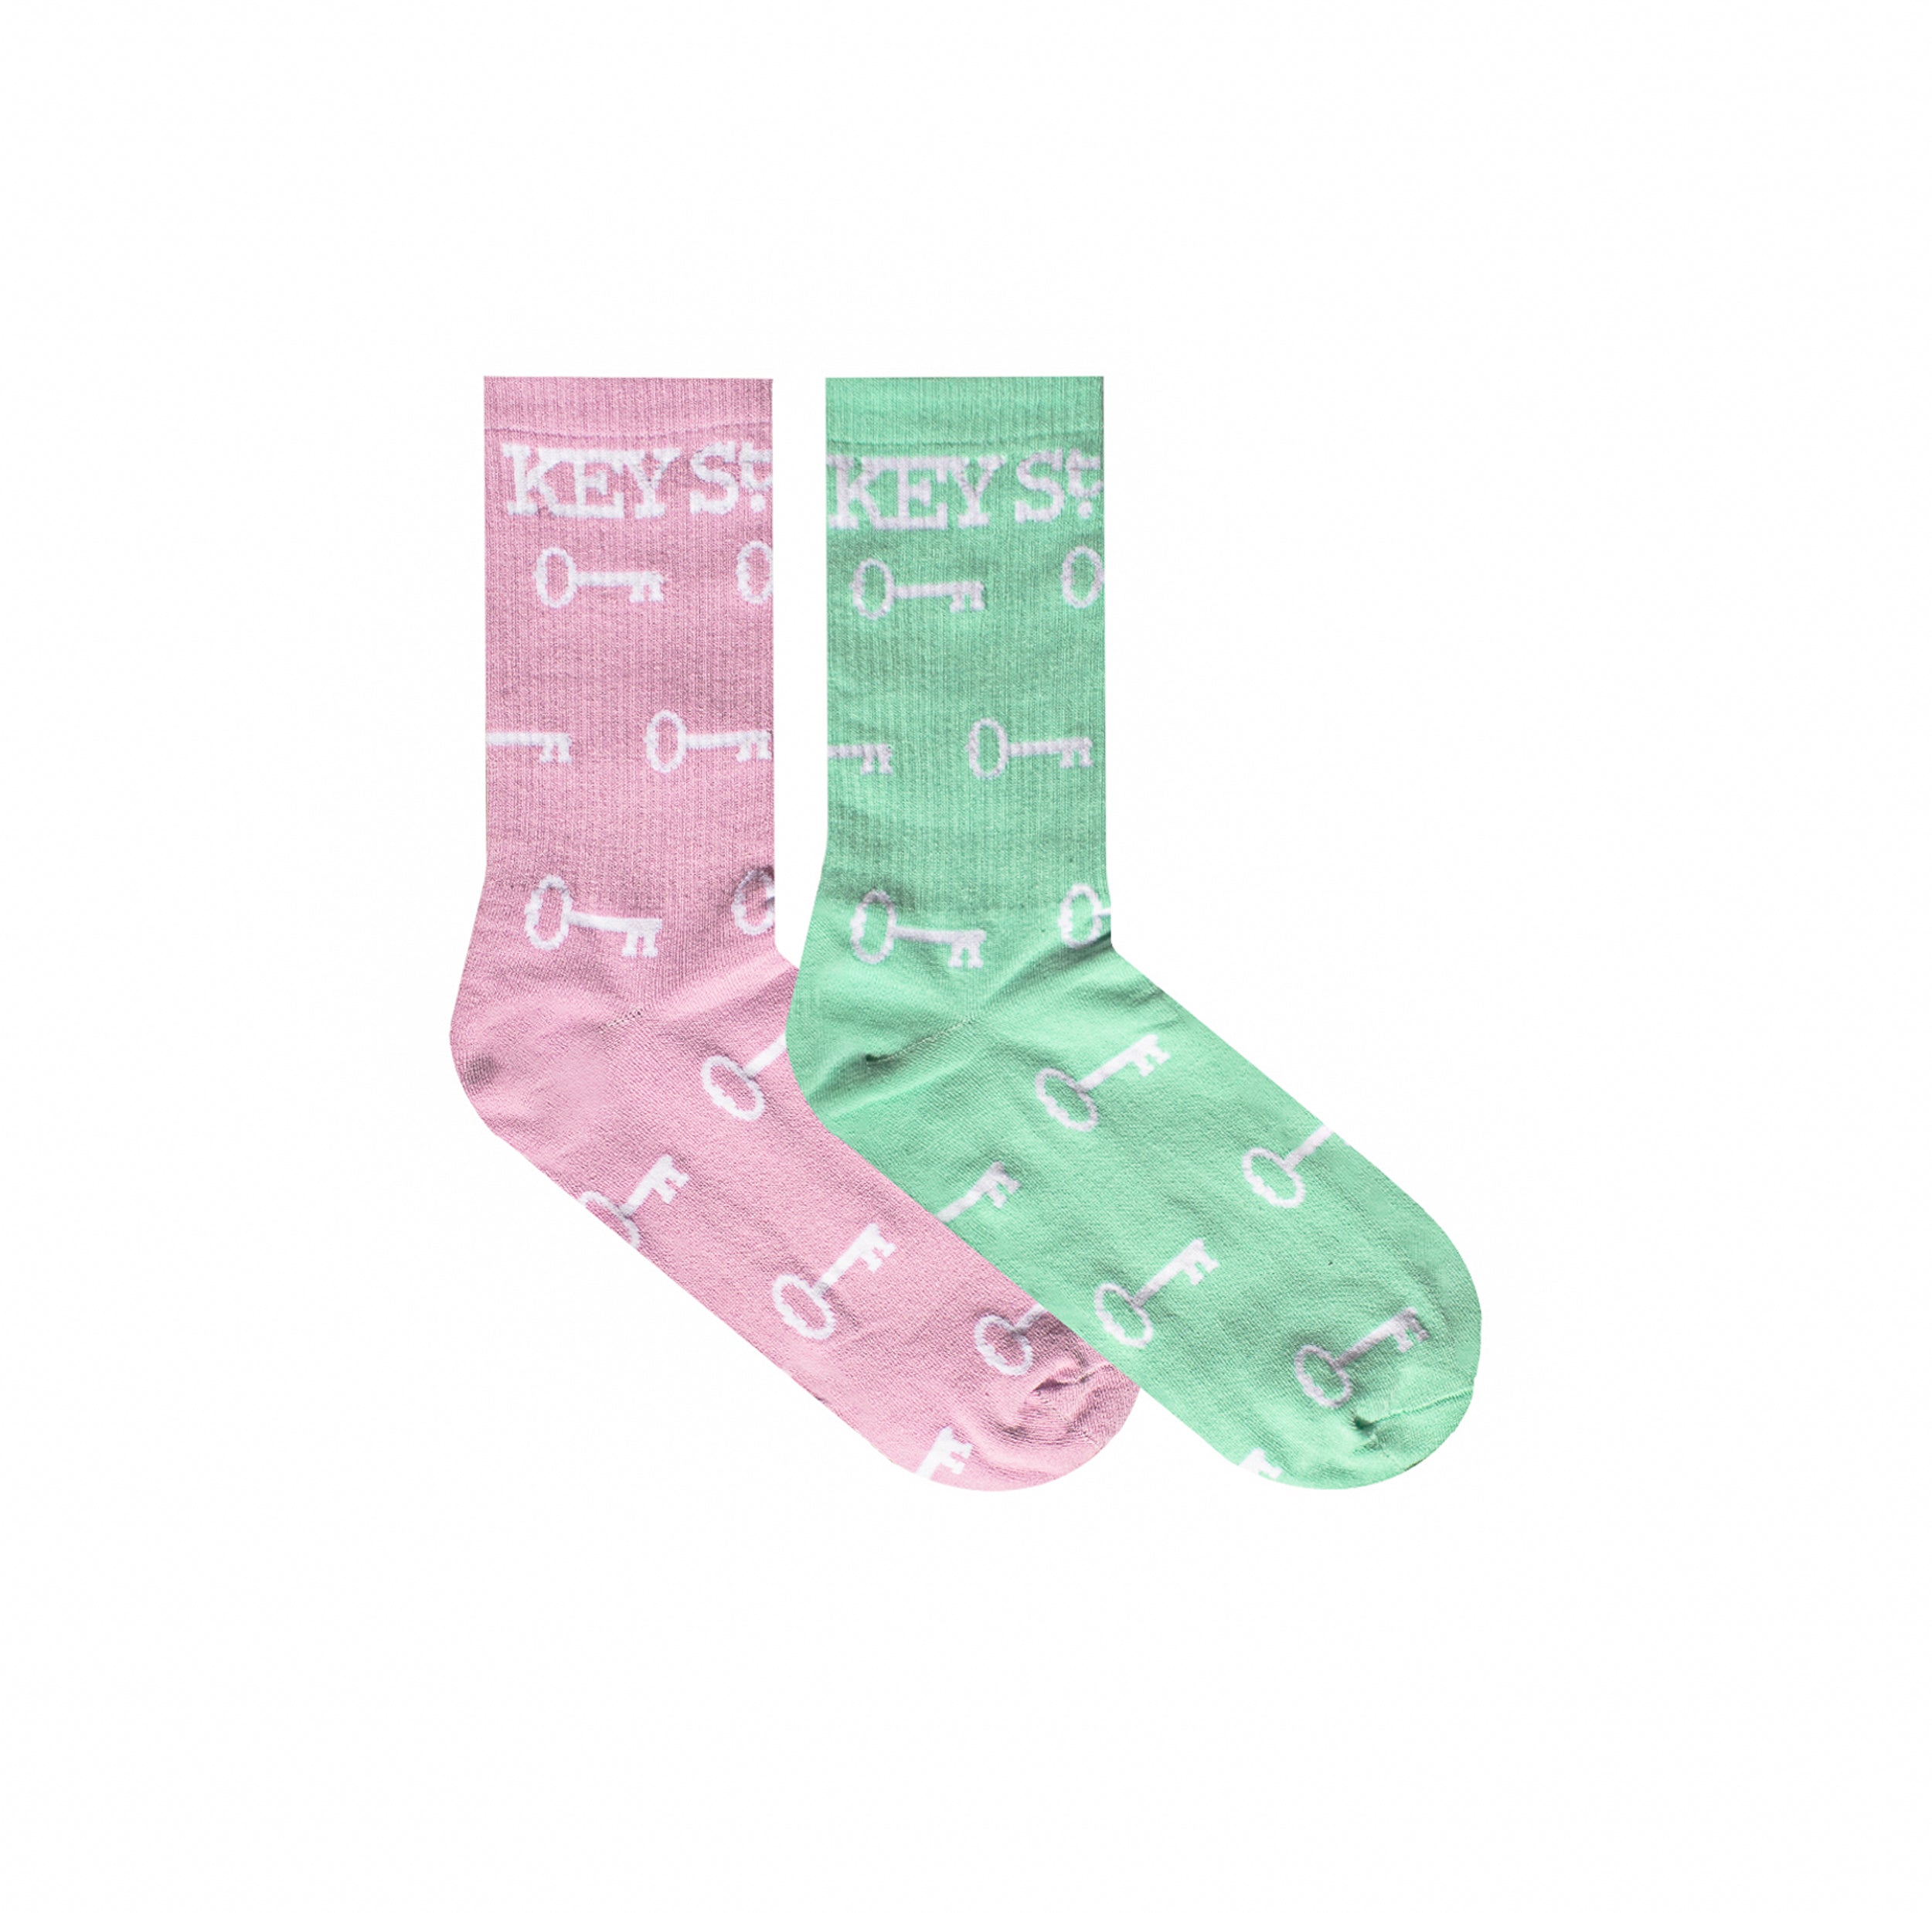 The Mismatch Sock - Teal and Pink